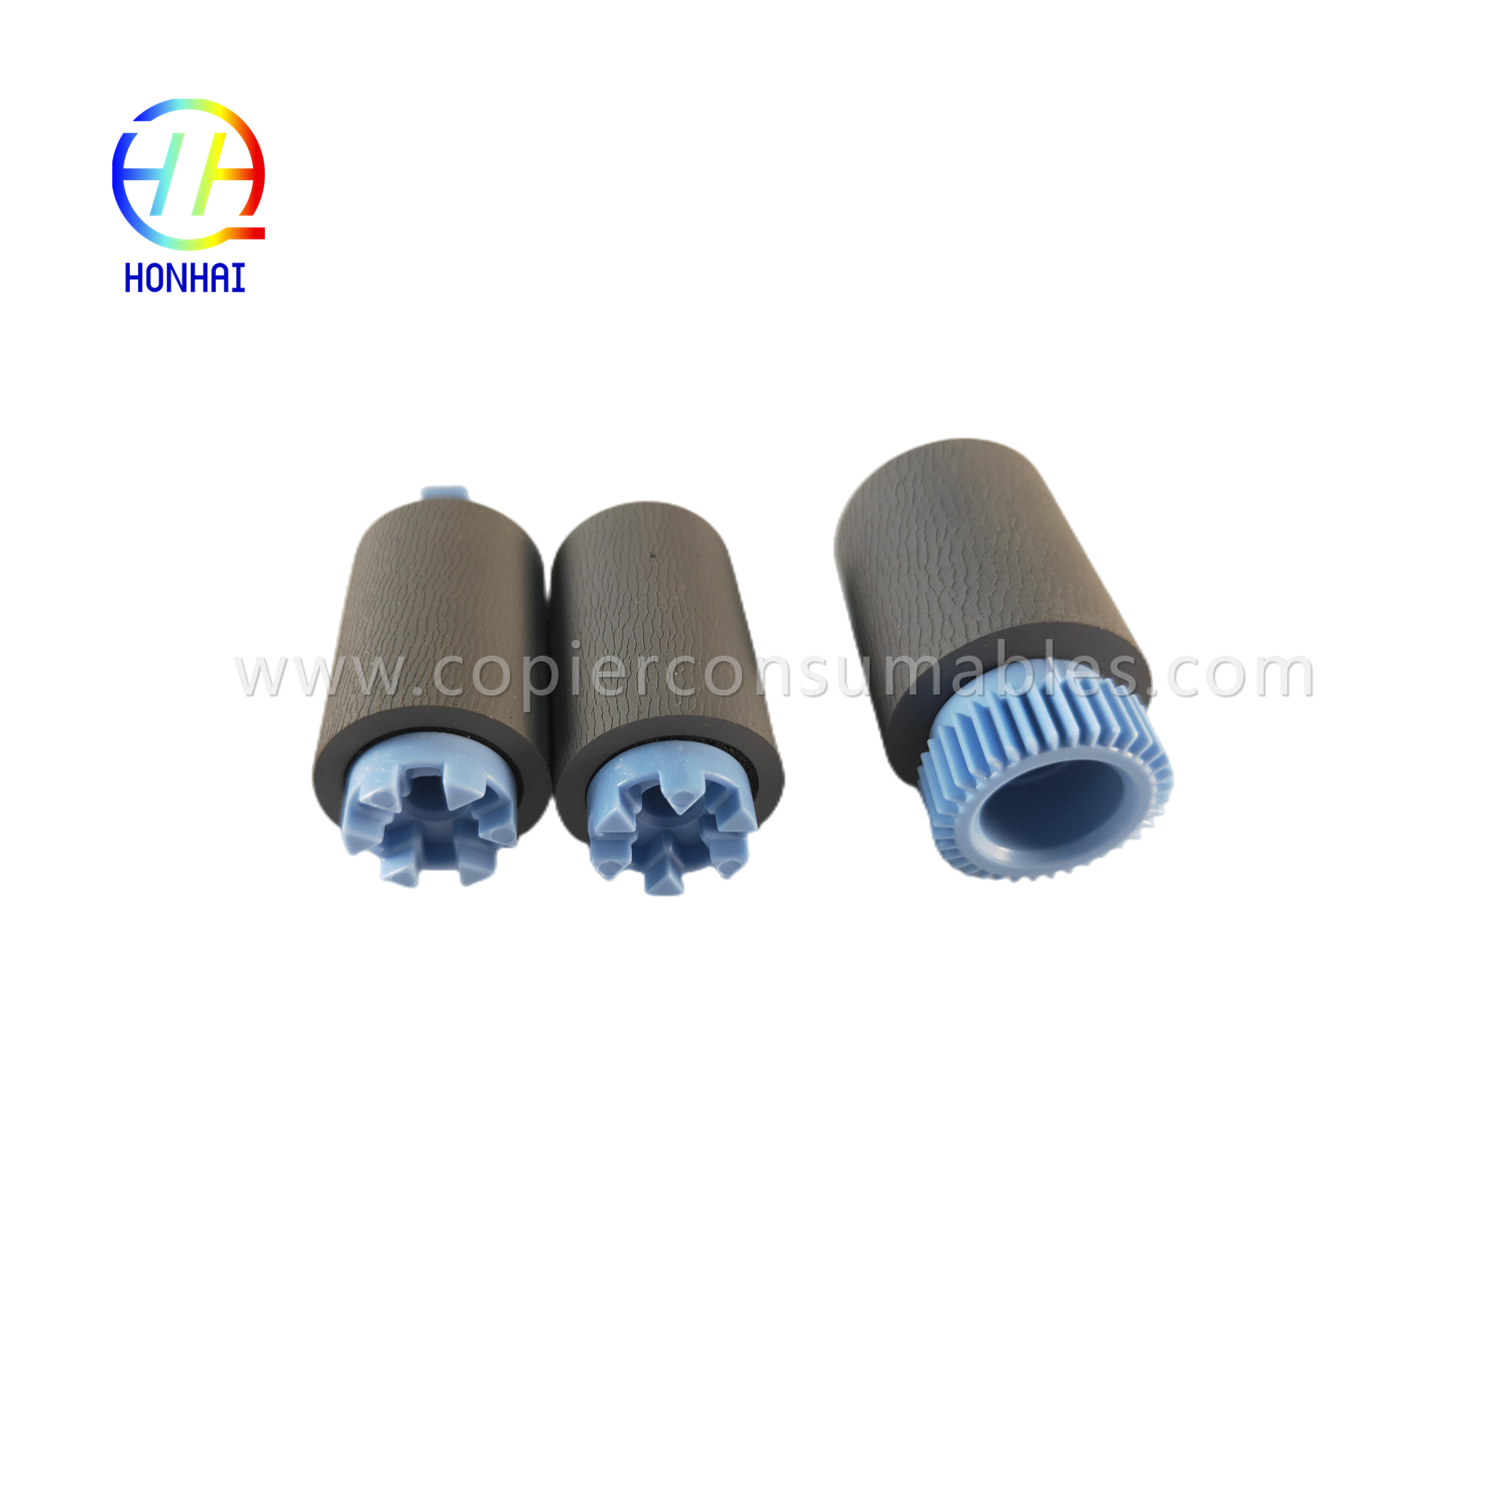 Tray 2 - 5 Pickup Feed Separation Roller SET for HP A7W93-67082 MFP 785f 780dn E77650z E77660z E77650dn E77660dn P77740dn P77750Z P77wd750Z P77wd500